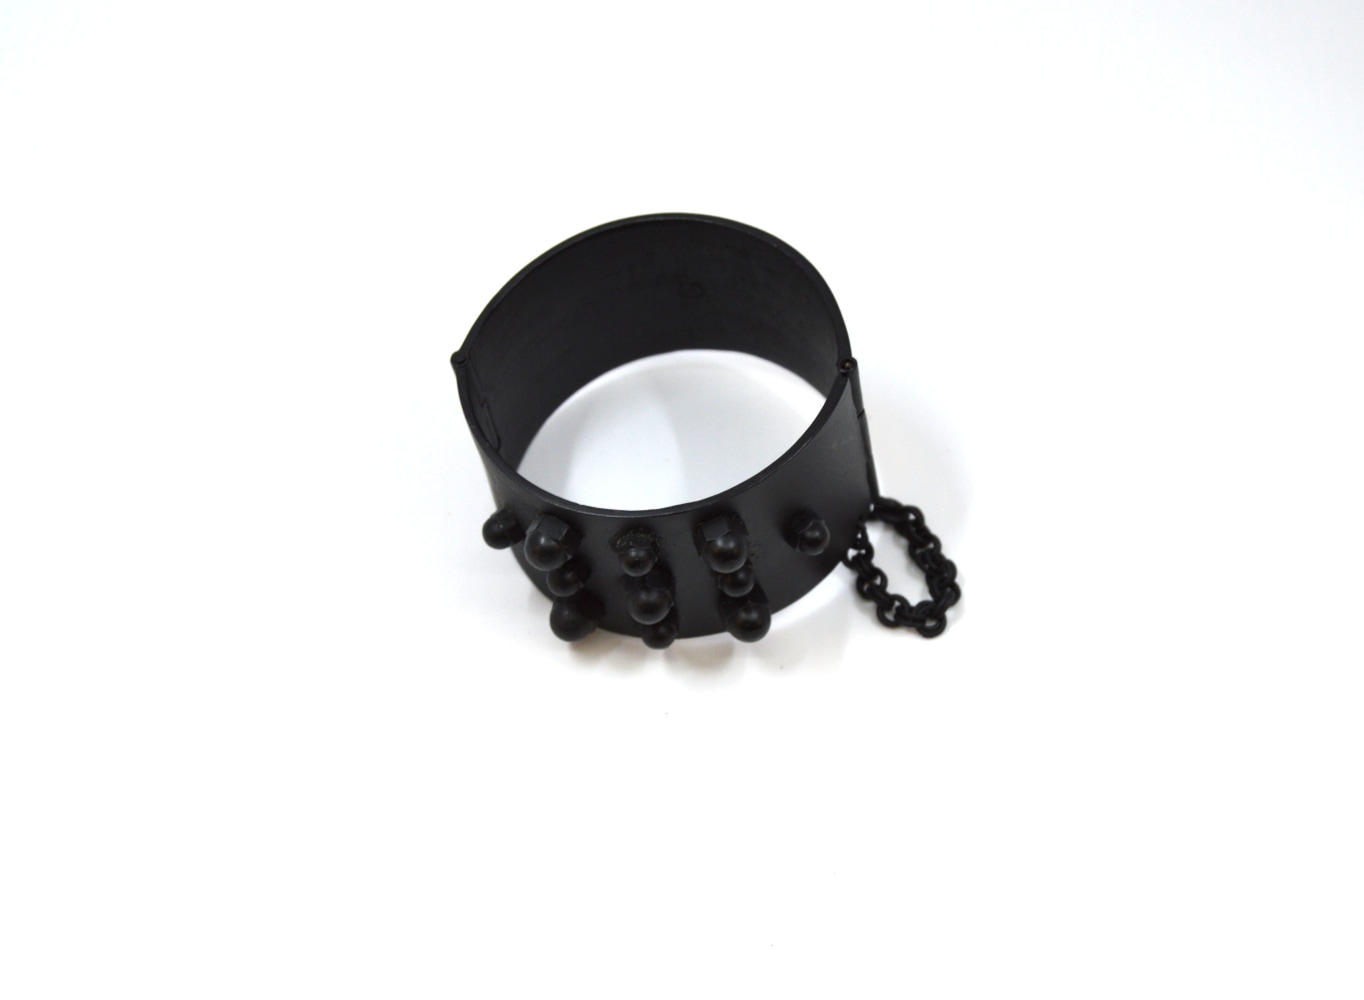 Amanda Kaiserman, Esclave Cuff  one size  Brass Hardware (Acorn Nuts And Screws) With Black Finish